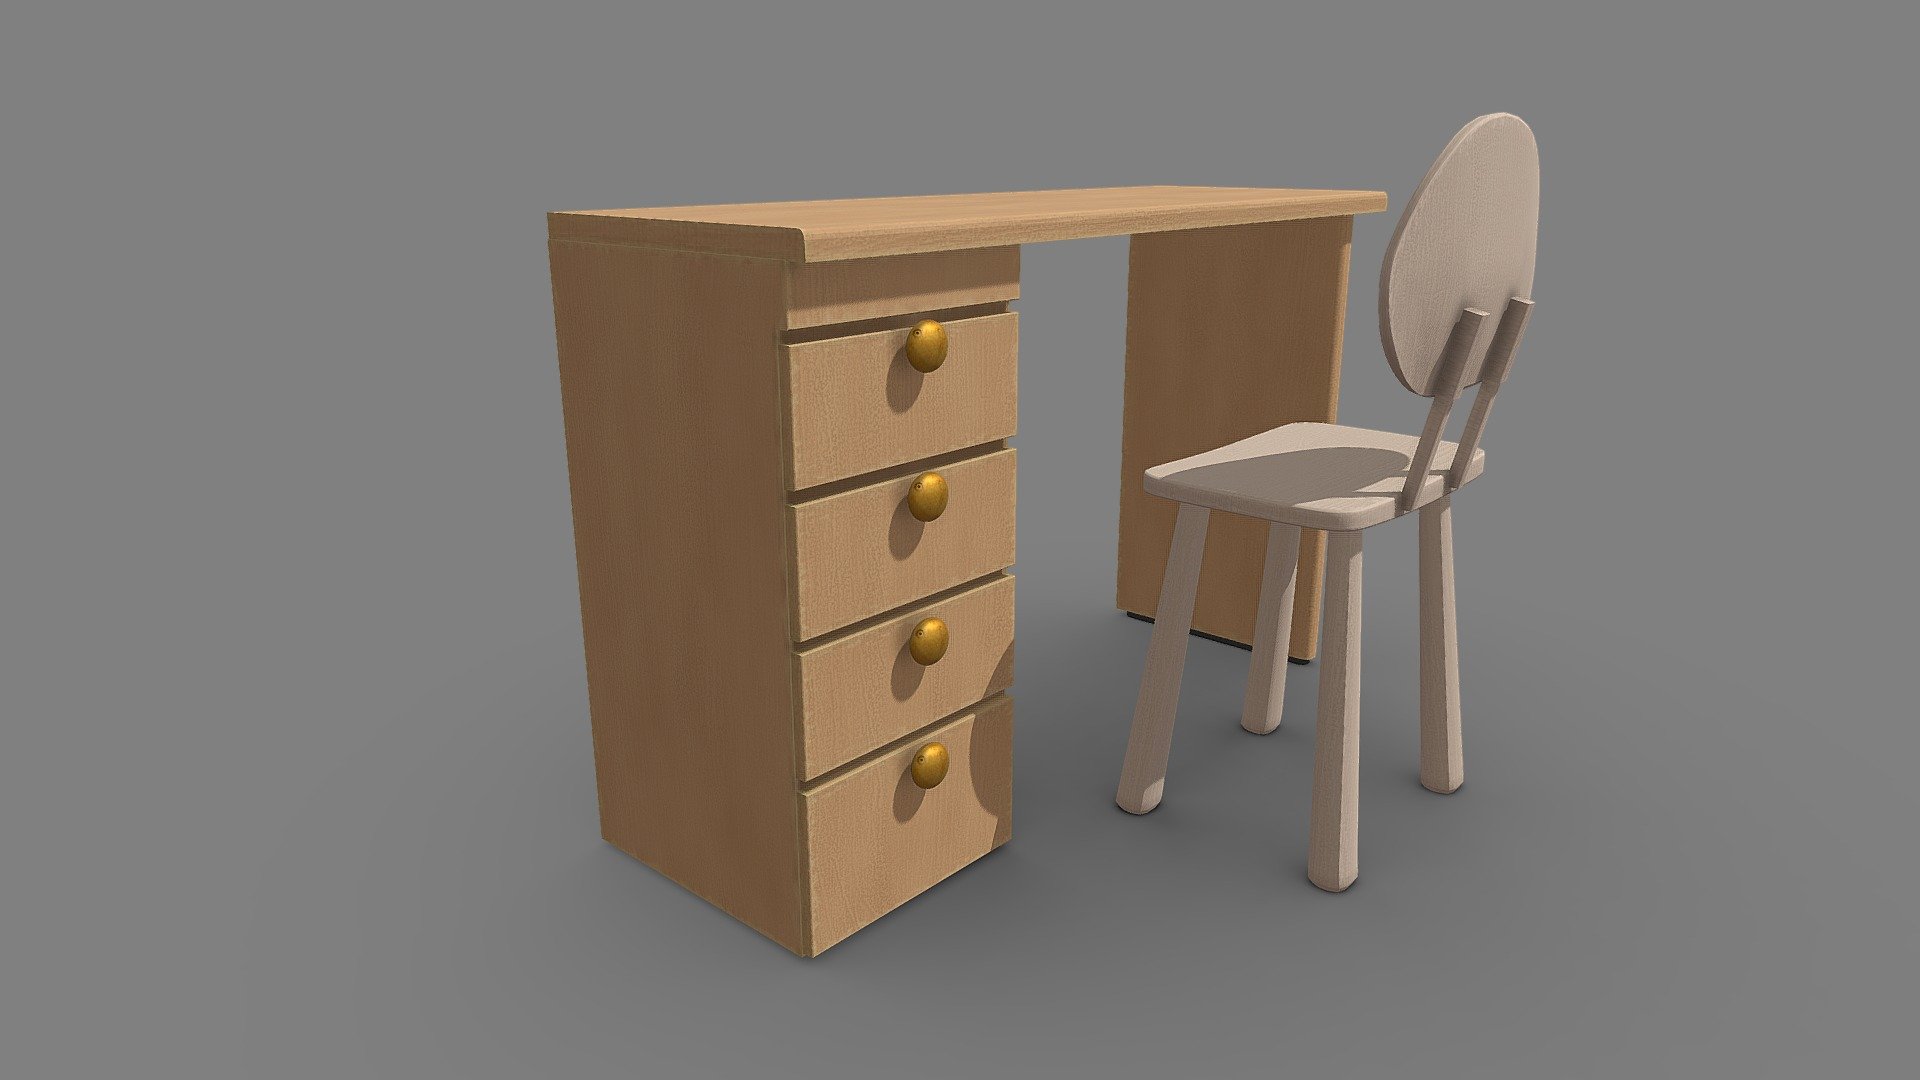 Cartoon wooden desk

Files :




3DS Max 2018 Vray 3.6

Blender 3.3 (Render with volumetrics)

Fbx

Obj

Gltf

Usdz

1 PRB_Materials

5Textures _ 4k .png (Color, Specular, Roughness, Normals,)

Unit system is set to metric(m). The dimensions are real

Any questions or comments about the model, you can write to me. I will be happy to assist you :)

Poly : 3,703
Verts : 3,920

VIdeo : https://youtu.be/1jWnWXcikvM - Cartoon wooden desk - Buy Royalty Free 3D model by 3D Figures (@3DFigures) 3d model